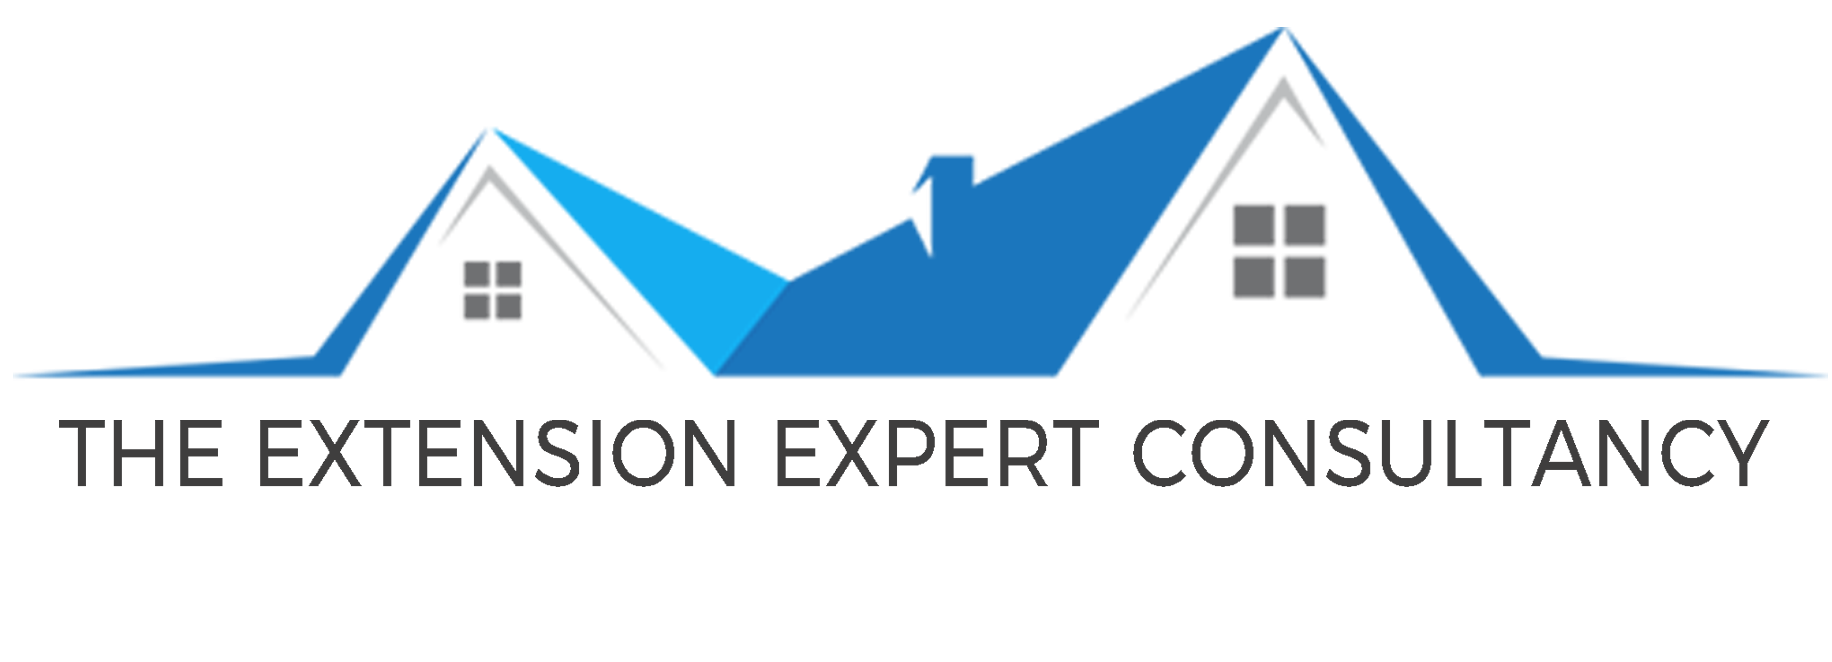 The Extension Expert